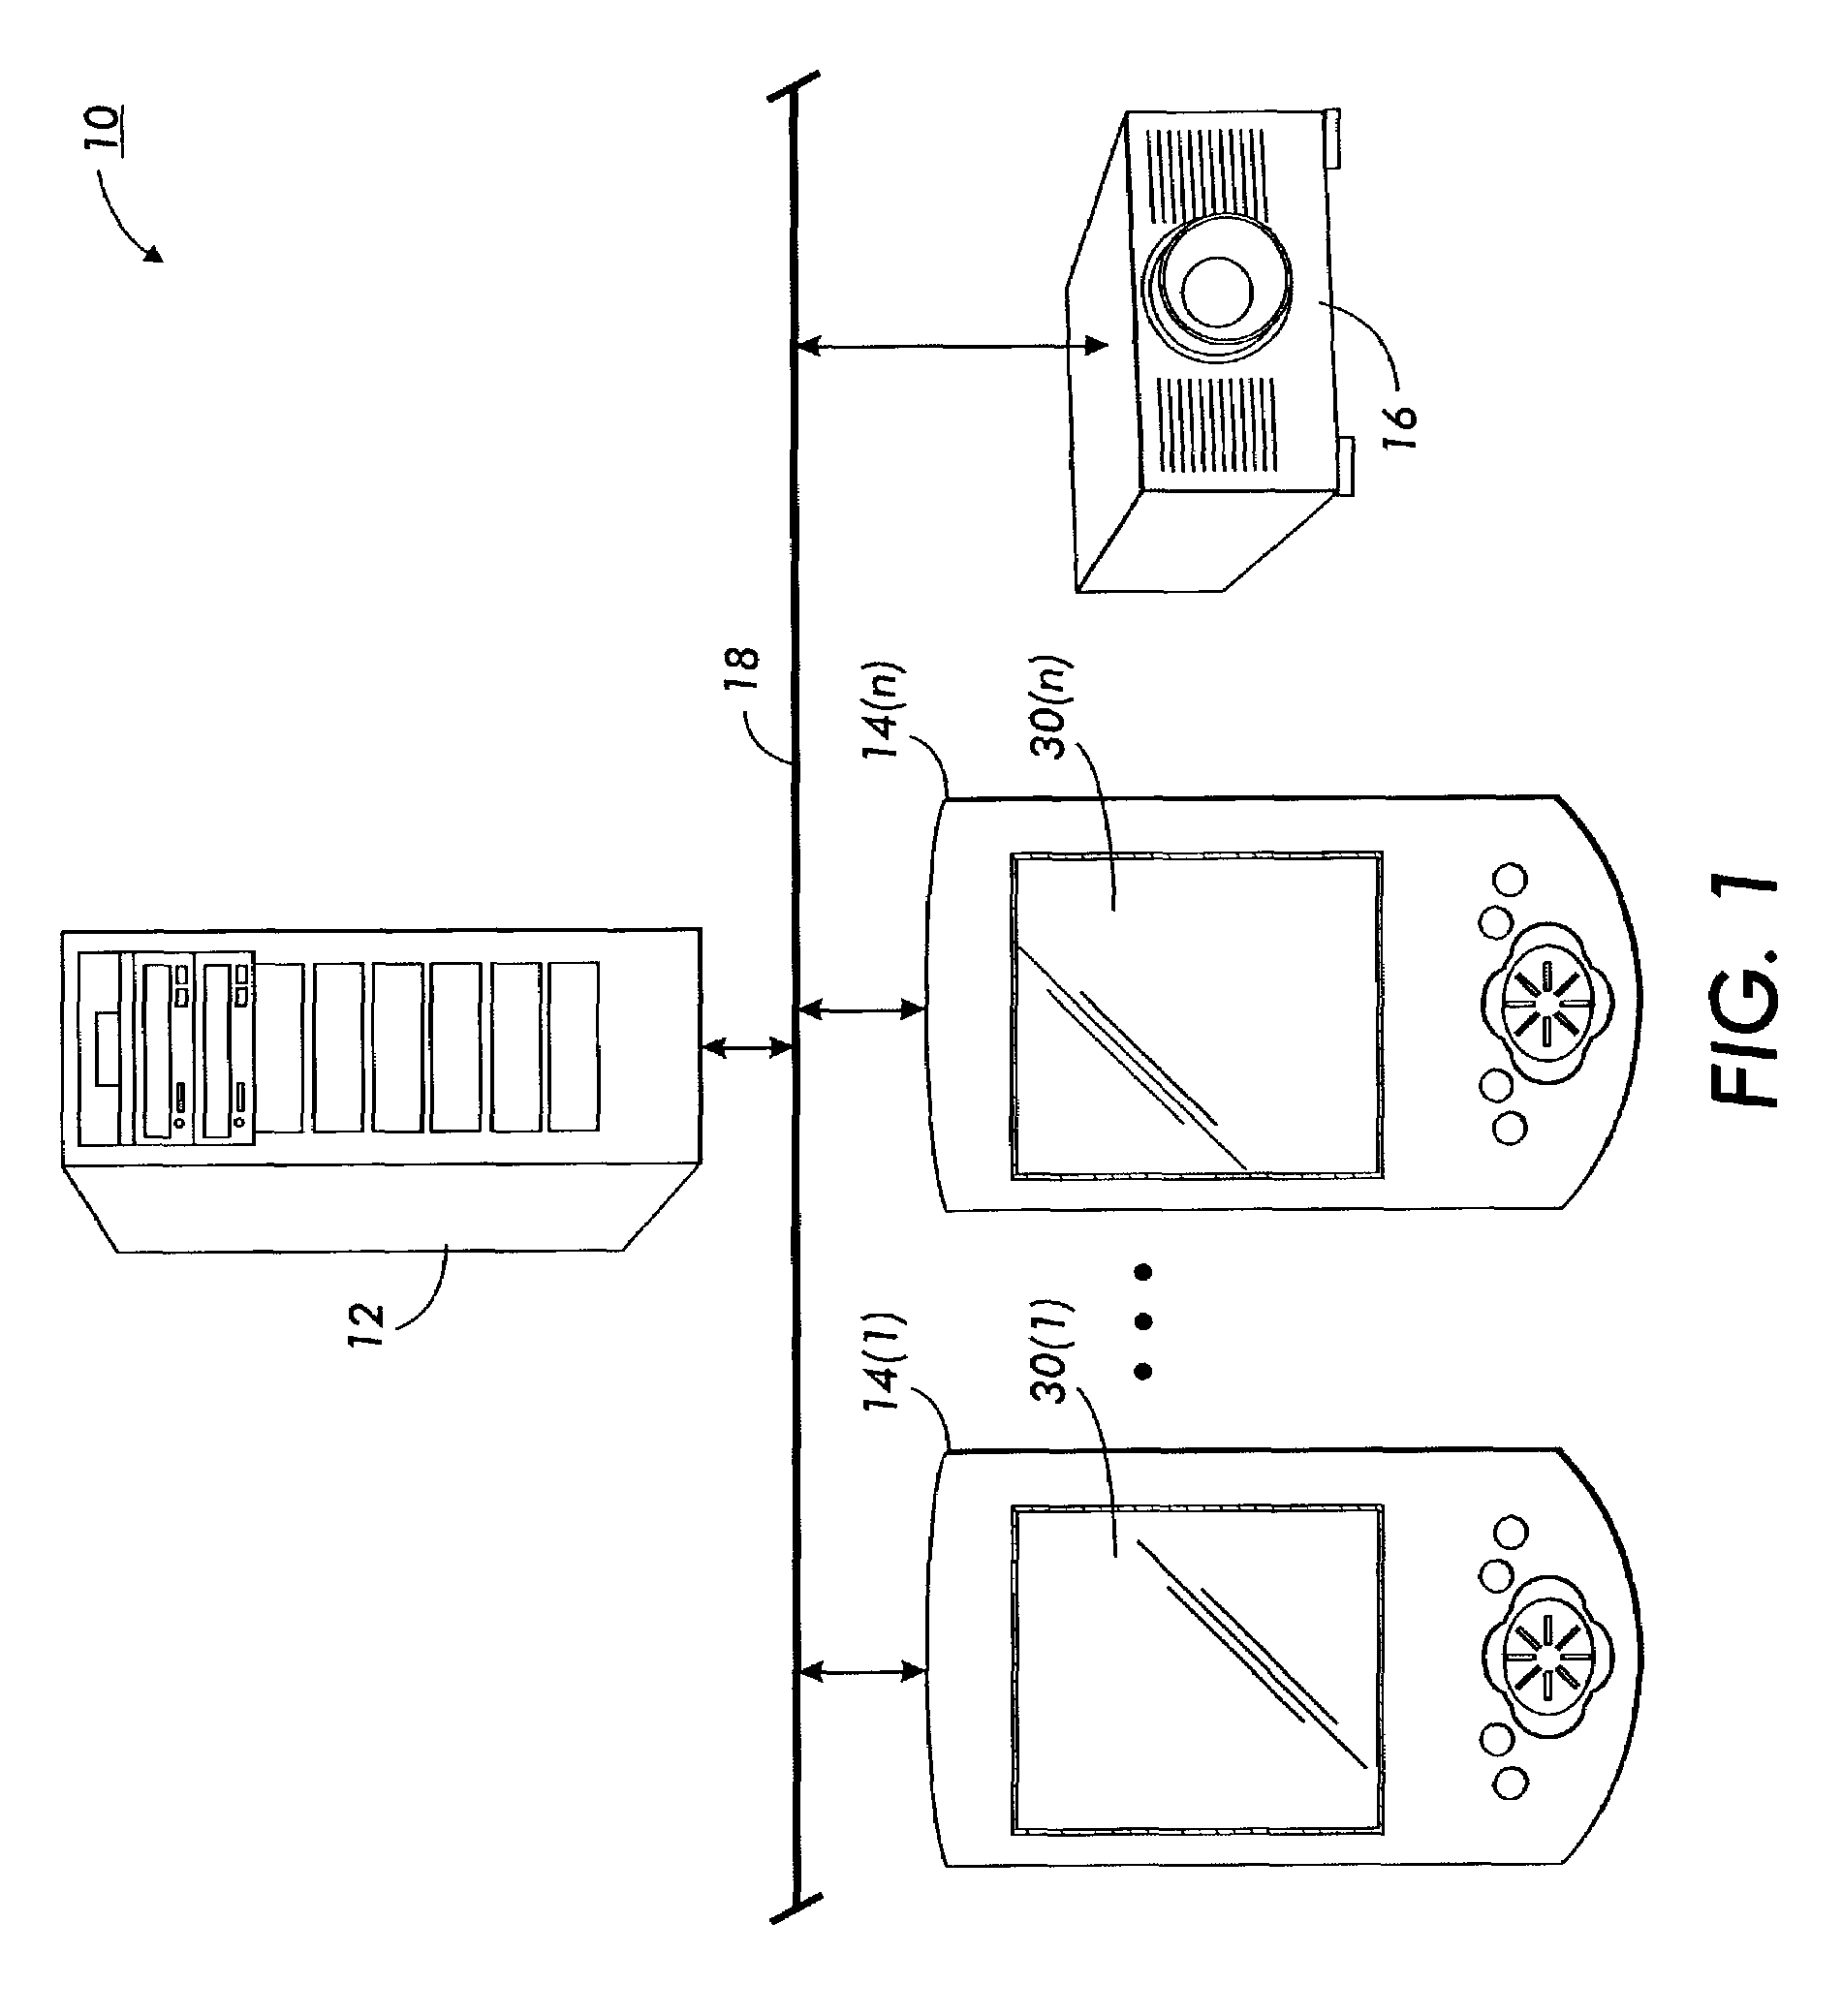 System and method for controlling communication